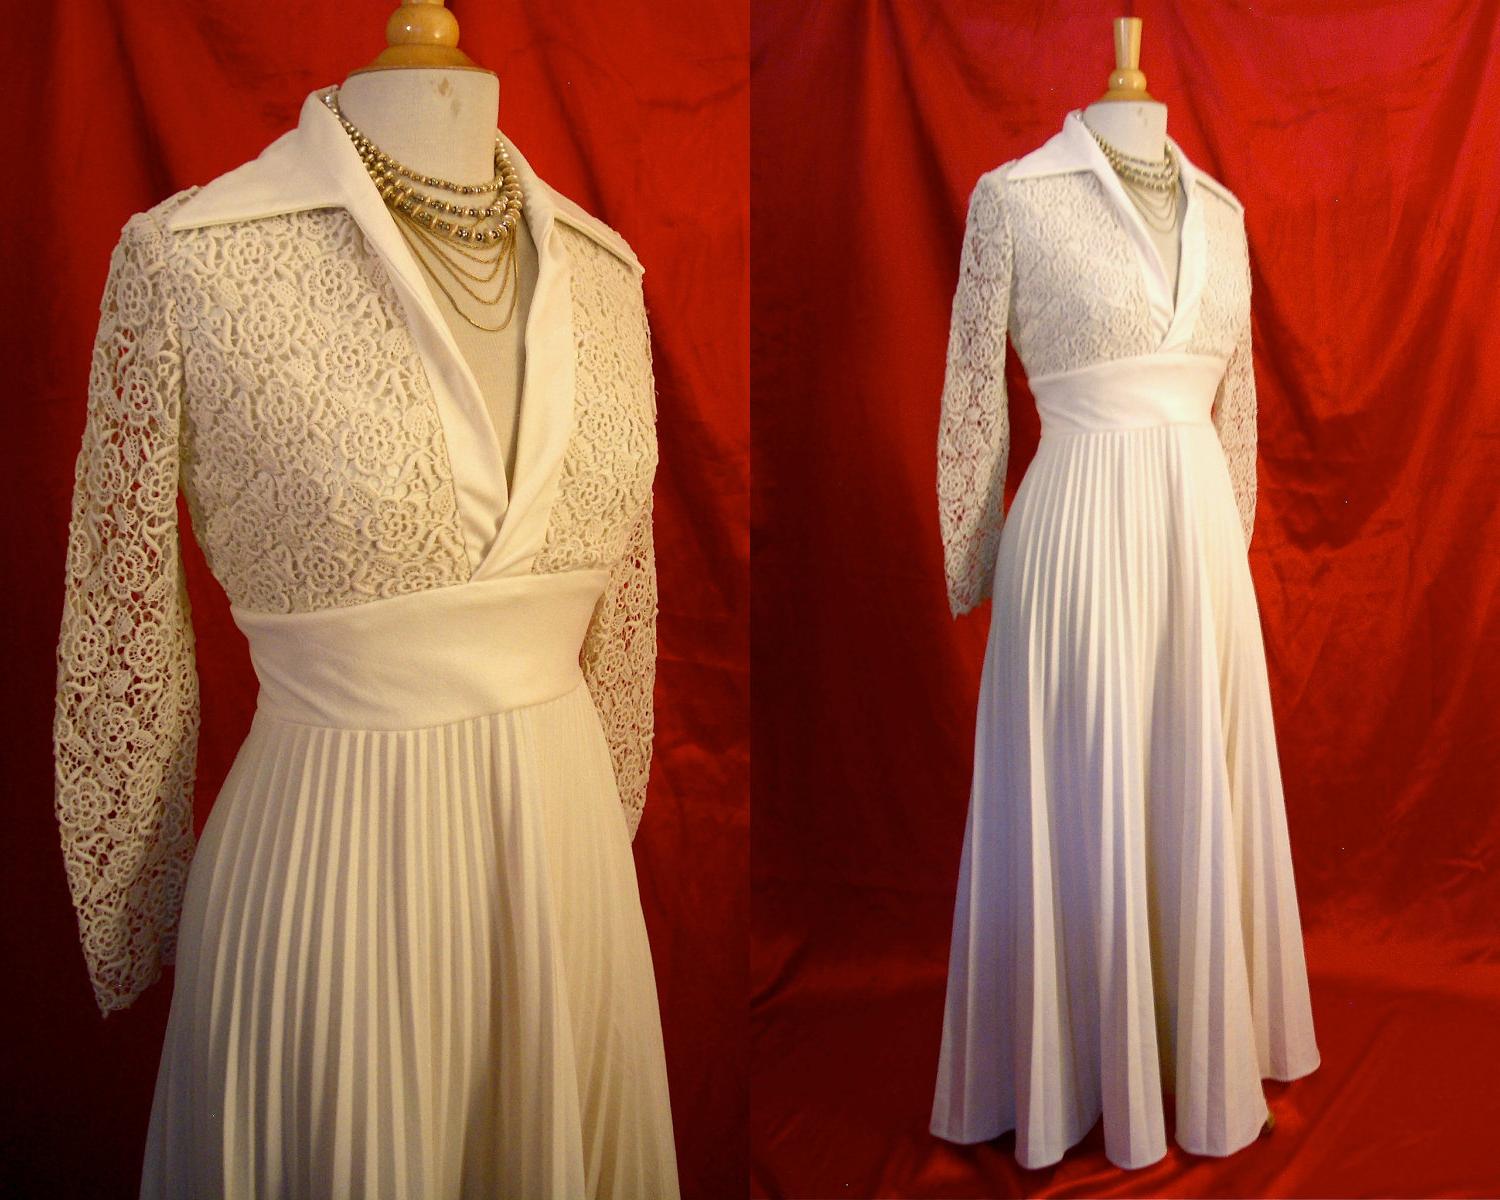 Formal - Beach Wedding - For Size Small to Medium Sophisticated Starlets